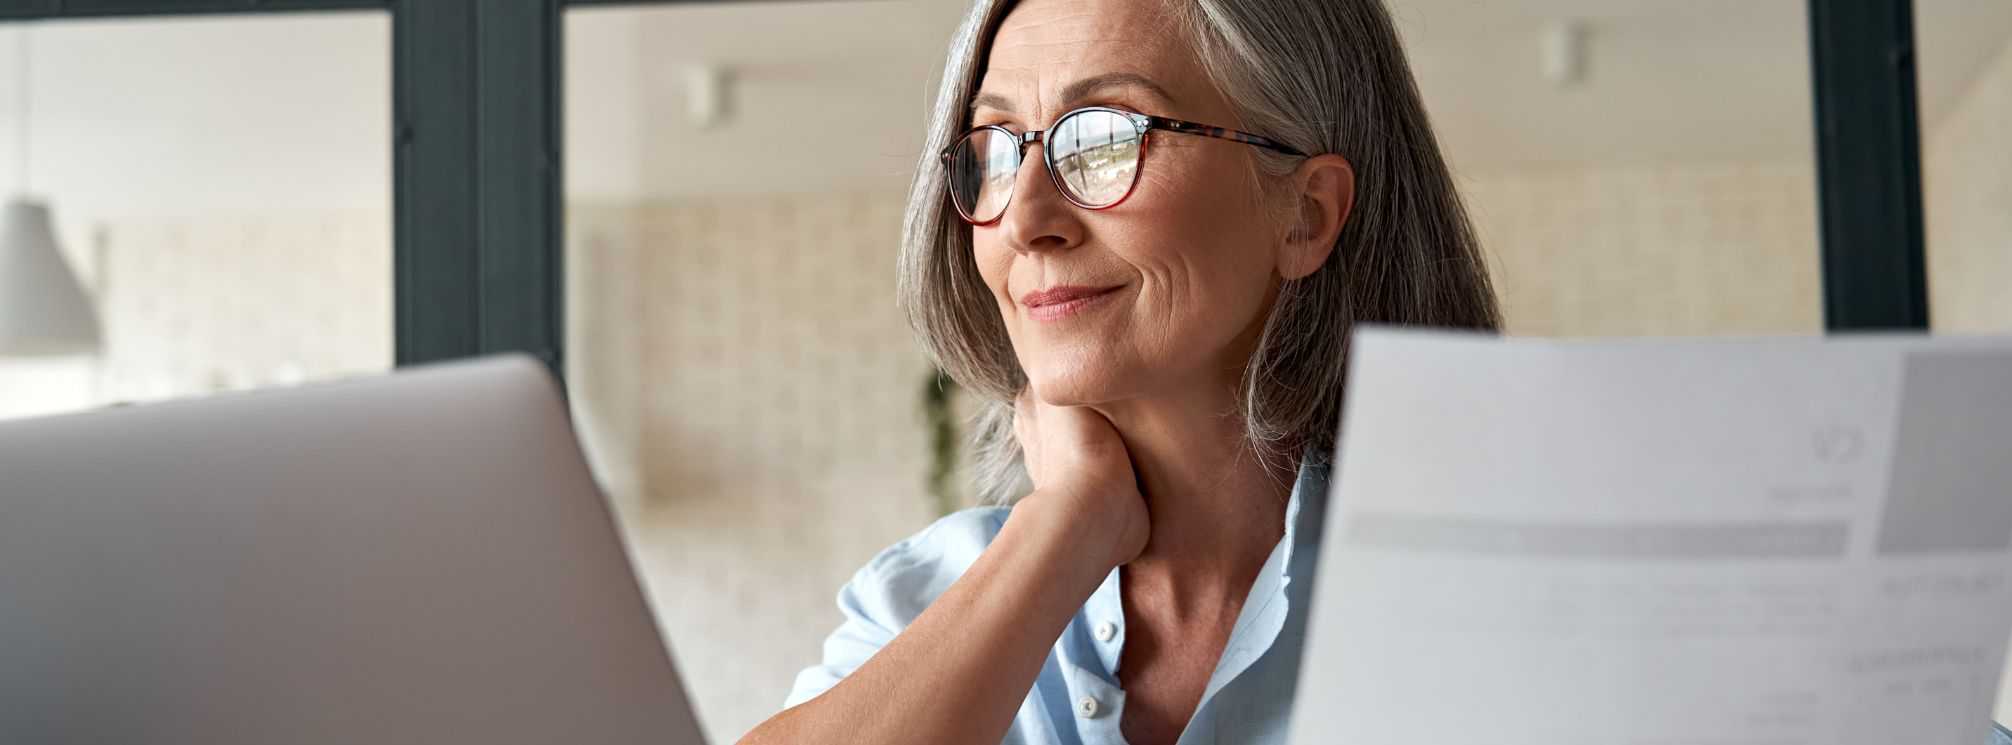 remote job interview. Older woman, wearing glasses, looking over a resume and on her laptop conducting a job interview remotely.